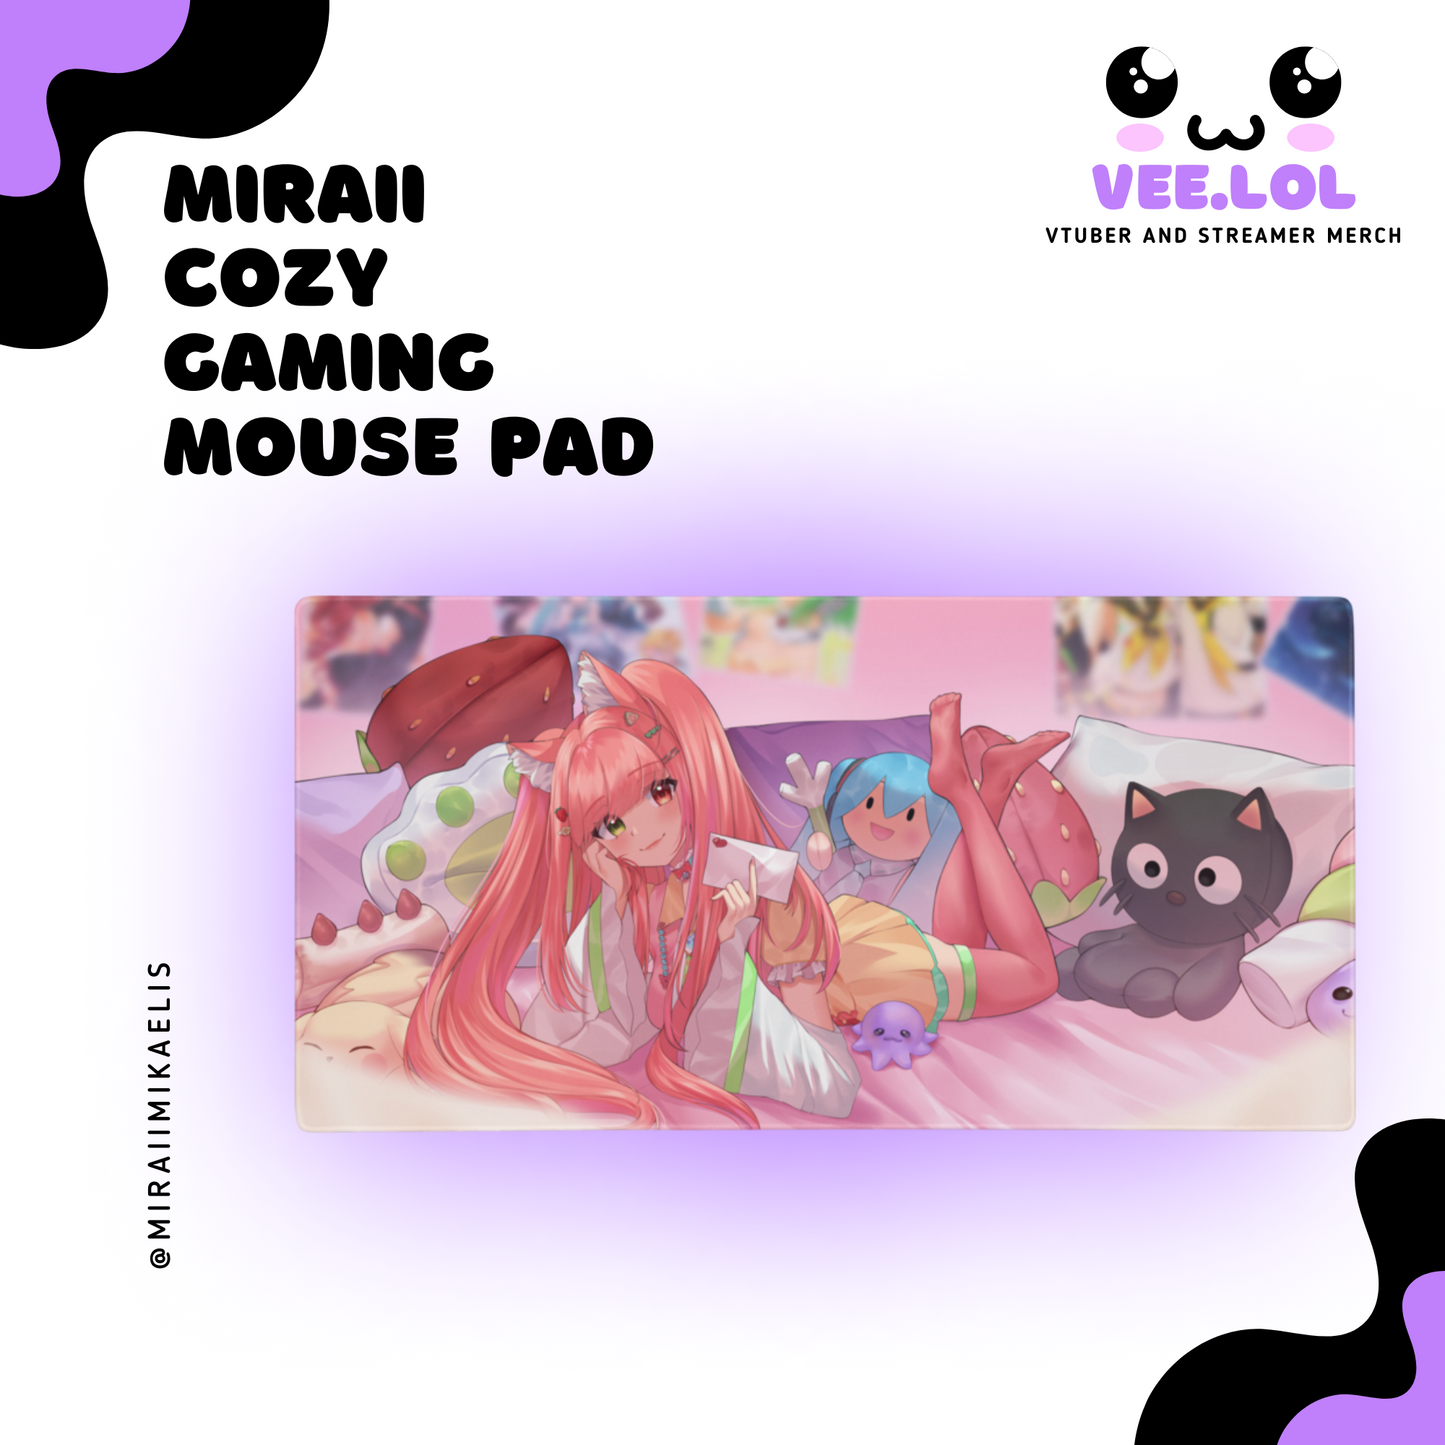 Miraii Cozy Gaming Mouse Pad